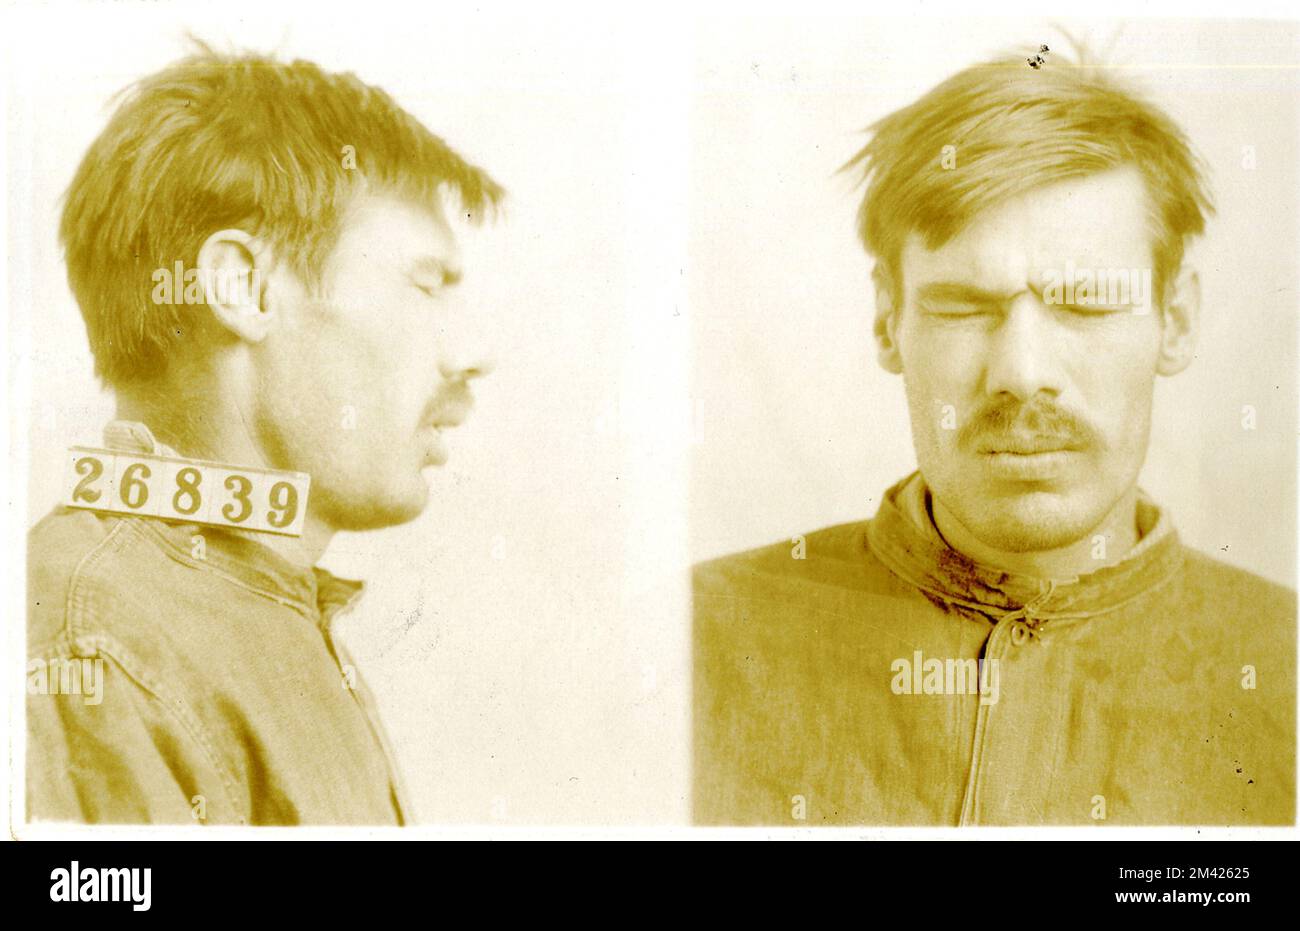 Photograph of Beecher Williams. This item is the prison photograph, also known as the 'mug shot,' of Leavenworth inmate Beecher Williams Bureau of Prisons, Inmate case files. Stock Photo